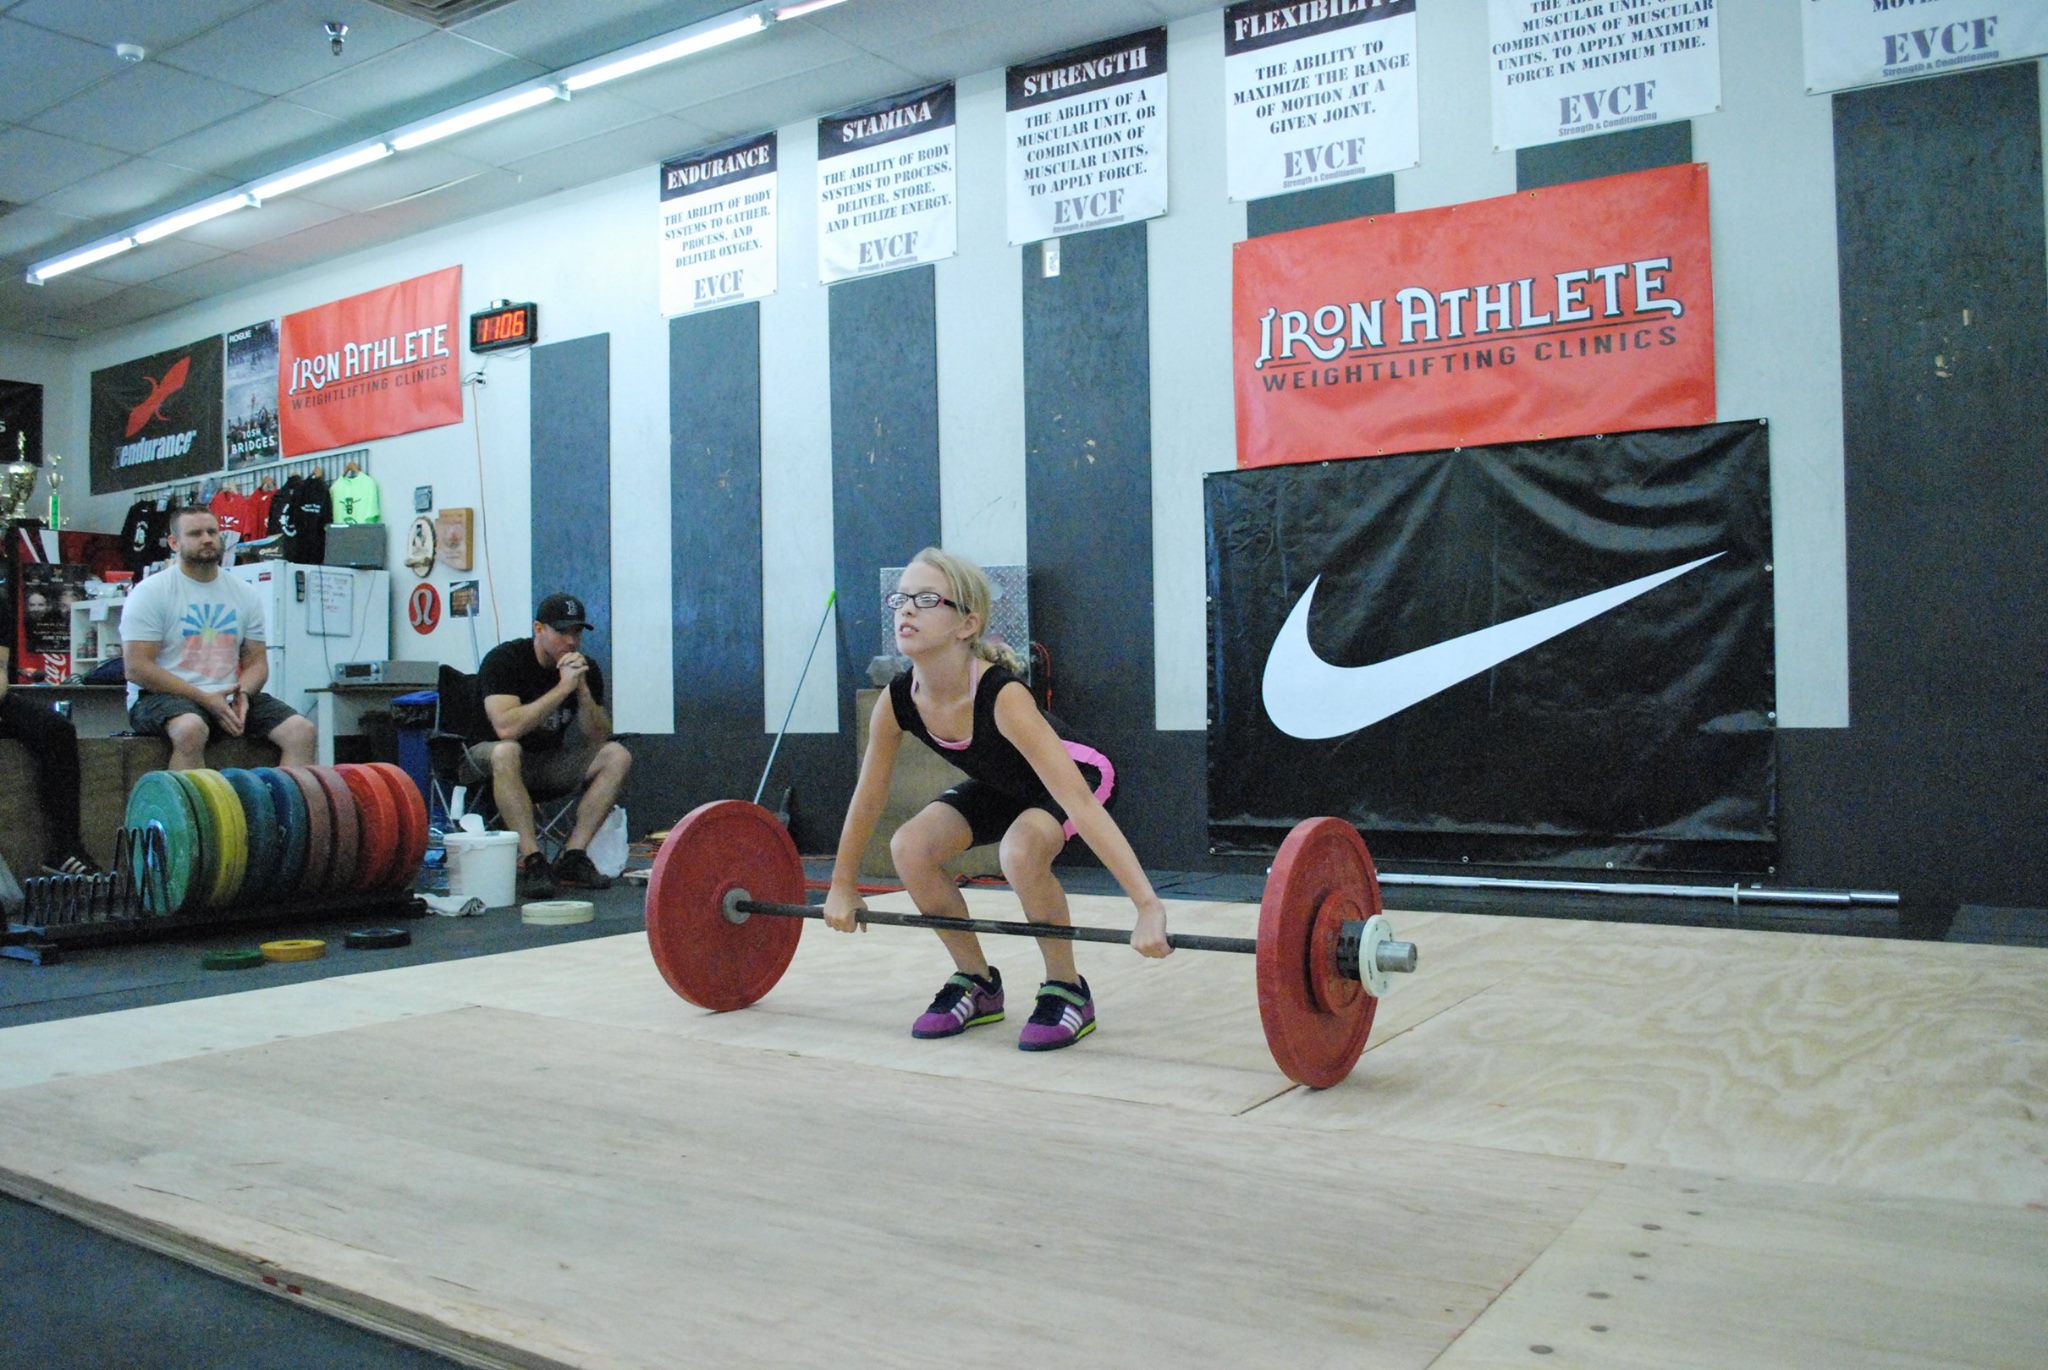 Young Girl Lifting At An Iron Athlete Competition